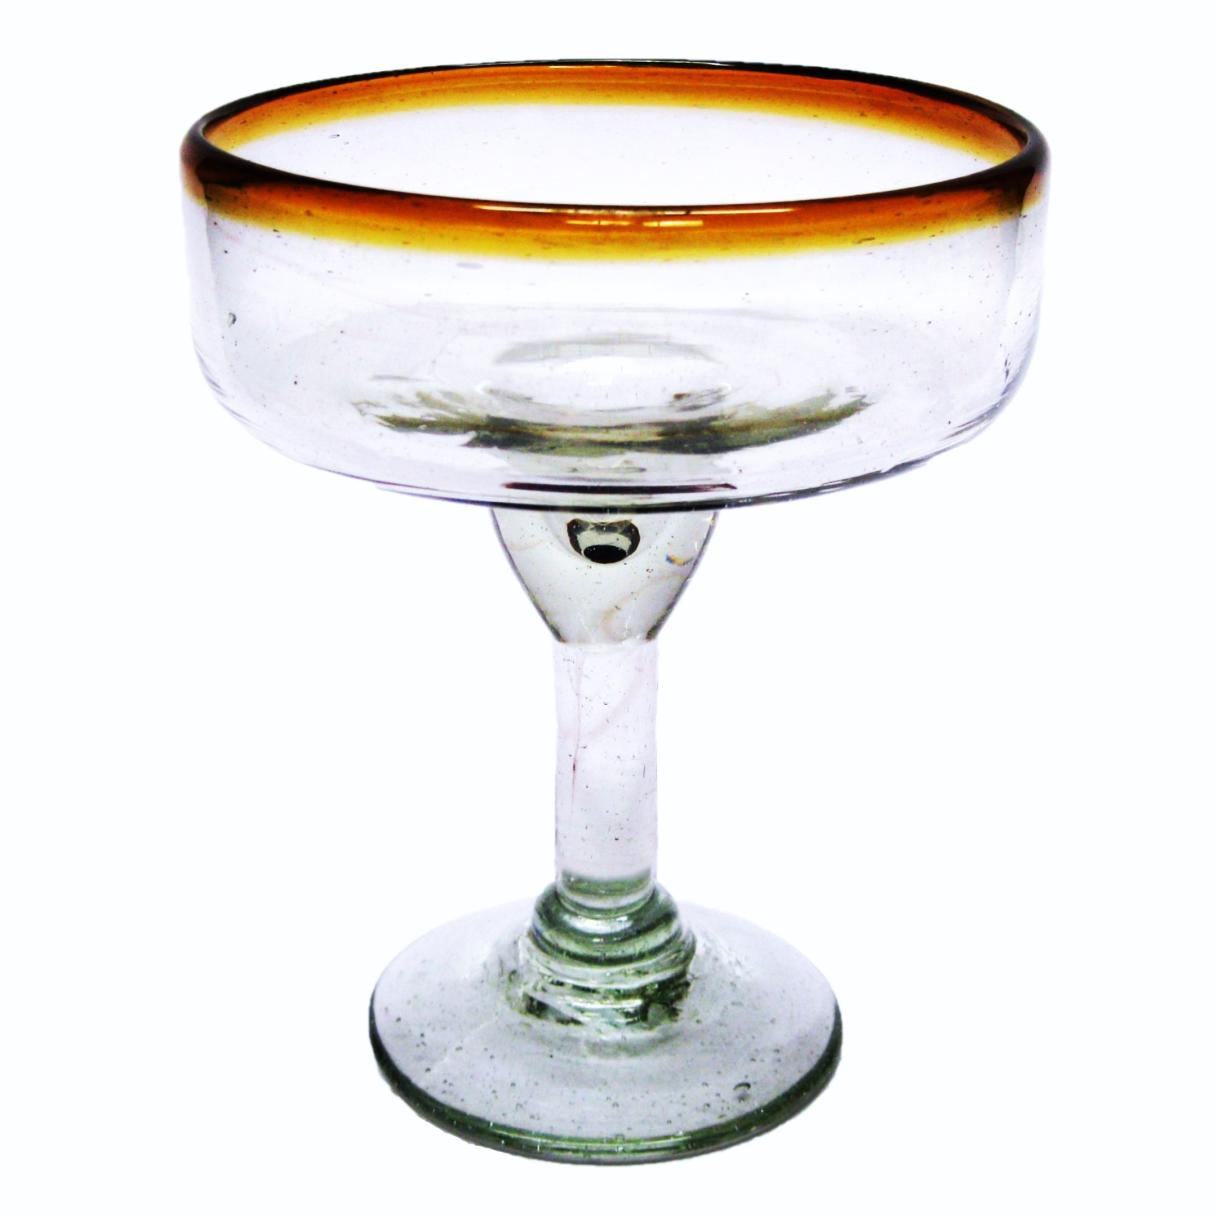 Colored Rim Glassware / Amber Rim 14 oz Large Margarita Glasses (set of 6) / For the margarita lover, these enjoyable large sized margarita glasses feature a cheerful amber color rim.